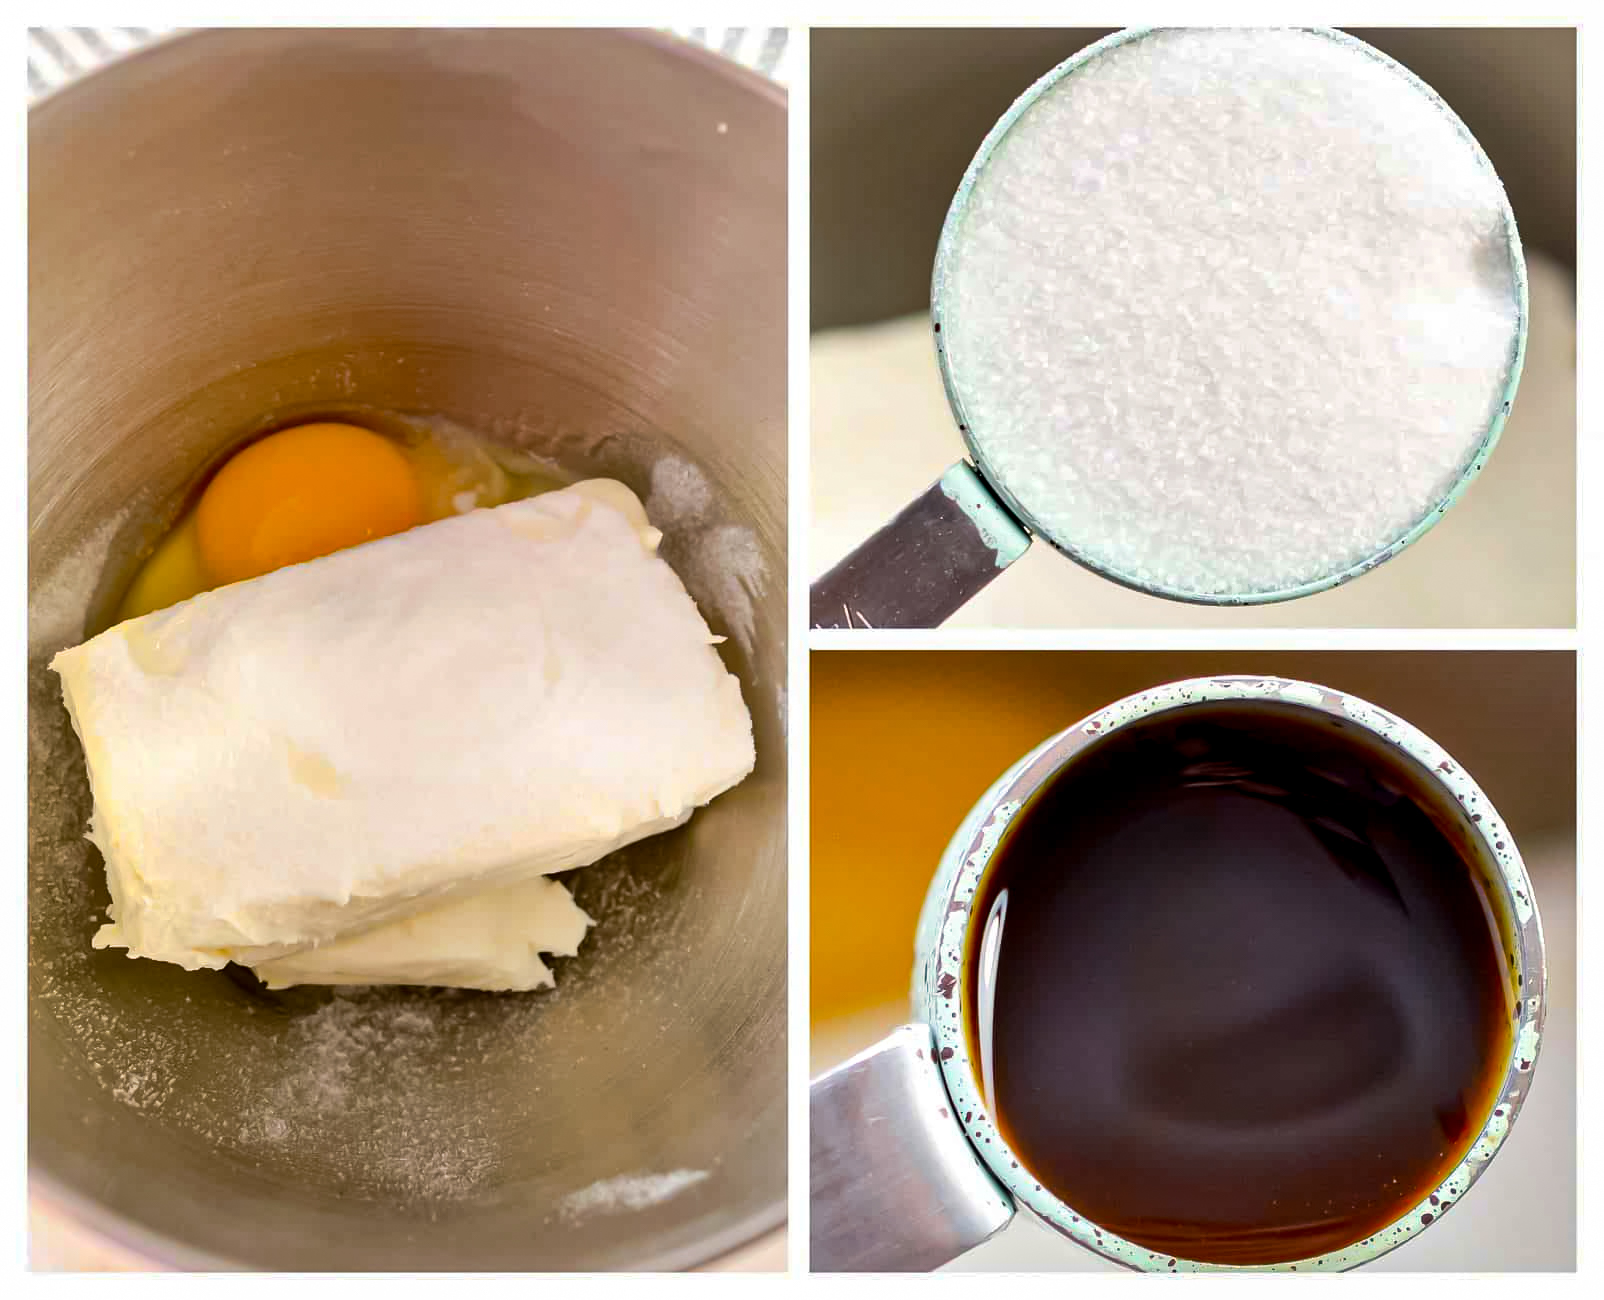 In a mixing bowl, beat together the cream cheese, sugar, vanilla, and last large egg until smooth and creamy.